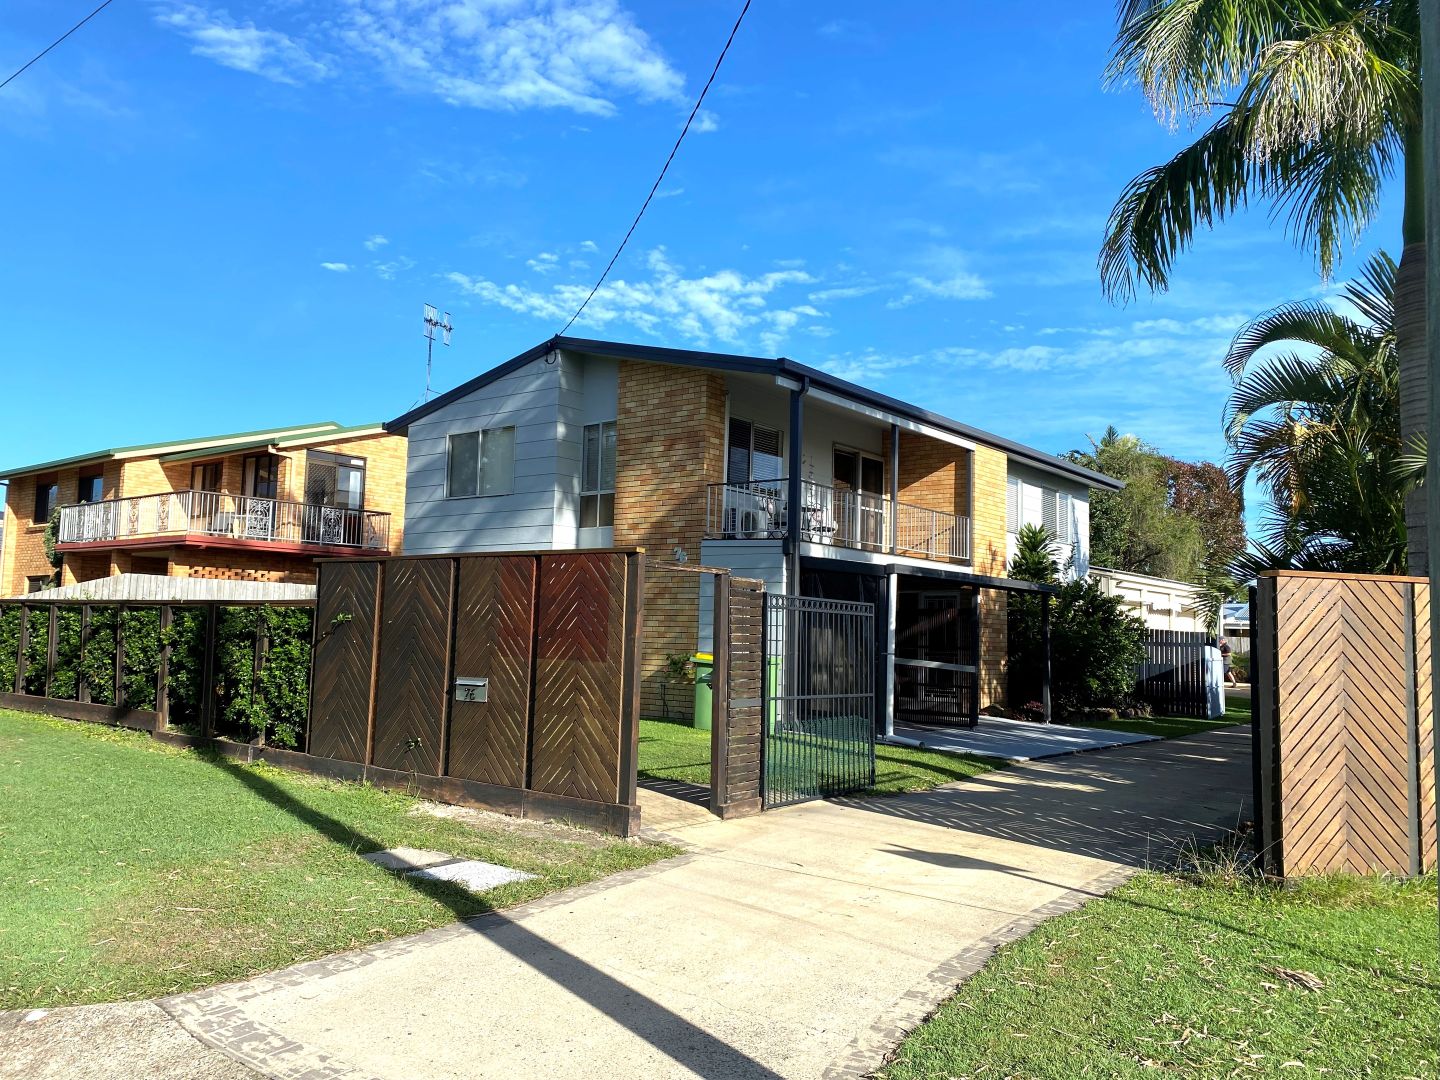 76 Gympie Road, Tin Can Bay QLD 4580